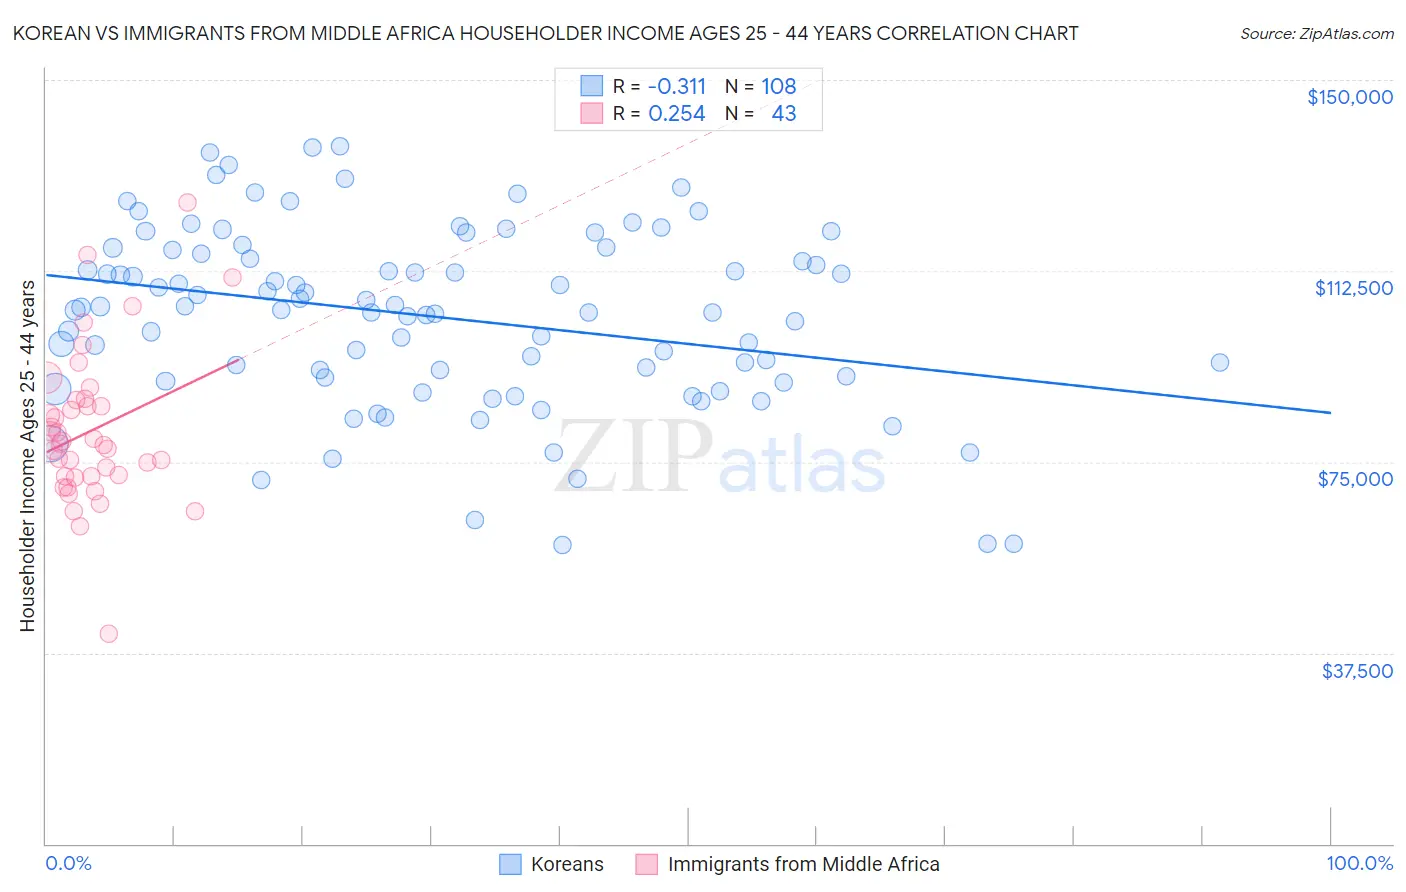 Korean vs Immigrants from Middle Africa Householder Income Ages 25 - 44 years